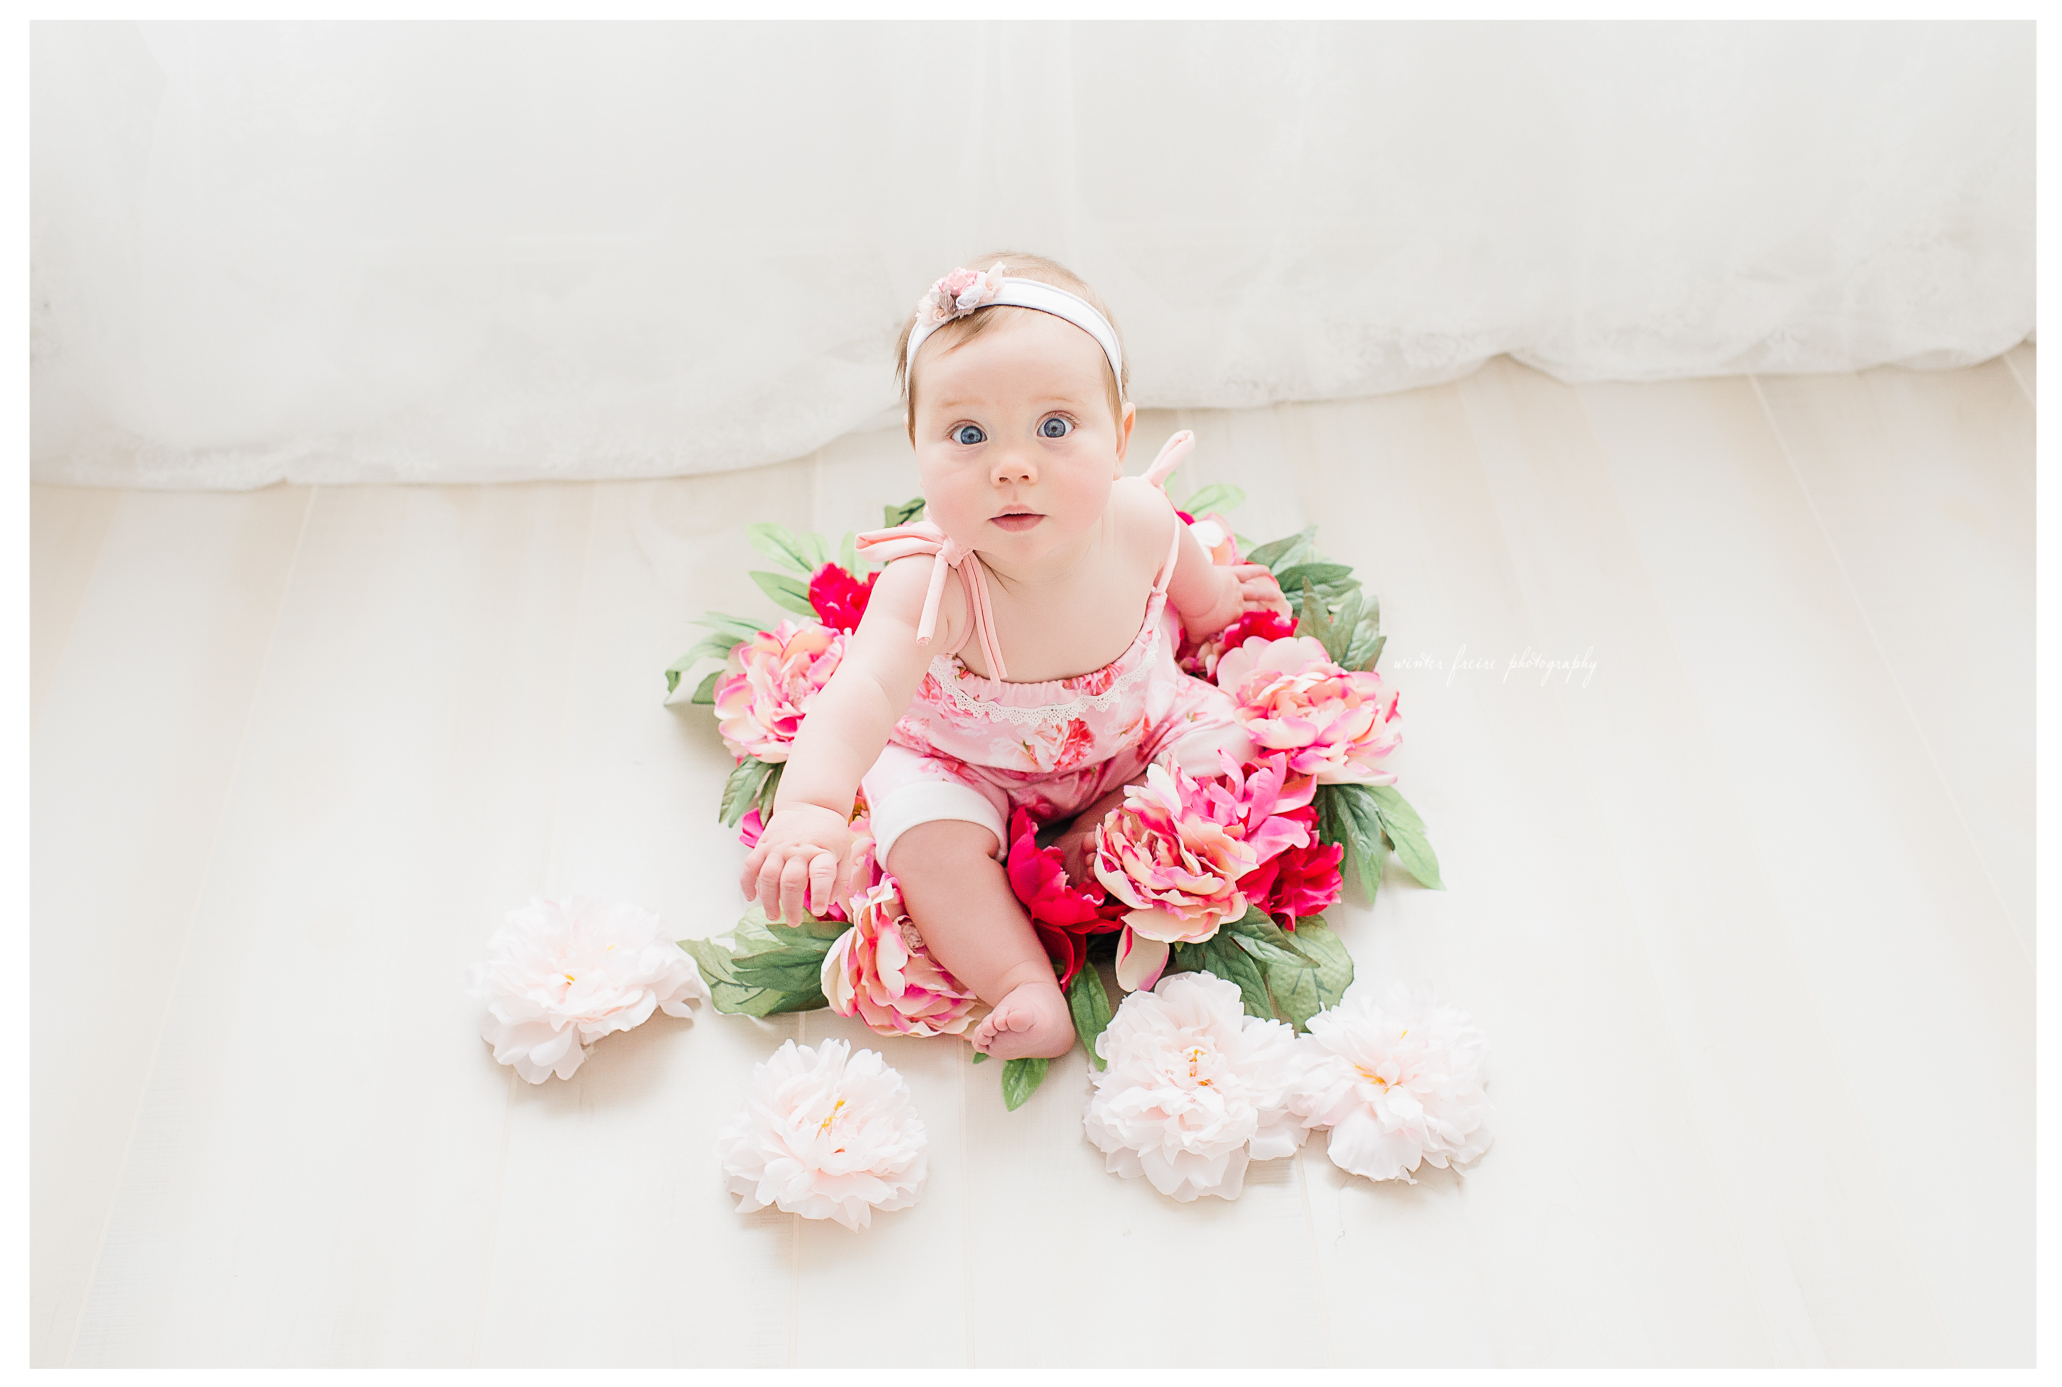 Winter Freire Photography | Sweet Pure Organic | Dayton, Ohio Fine Art Baby and Child Photography | Darling Baby Shop Commercial Shoot | Darling Baby Shop Summer Collection 2017